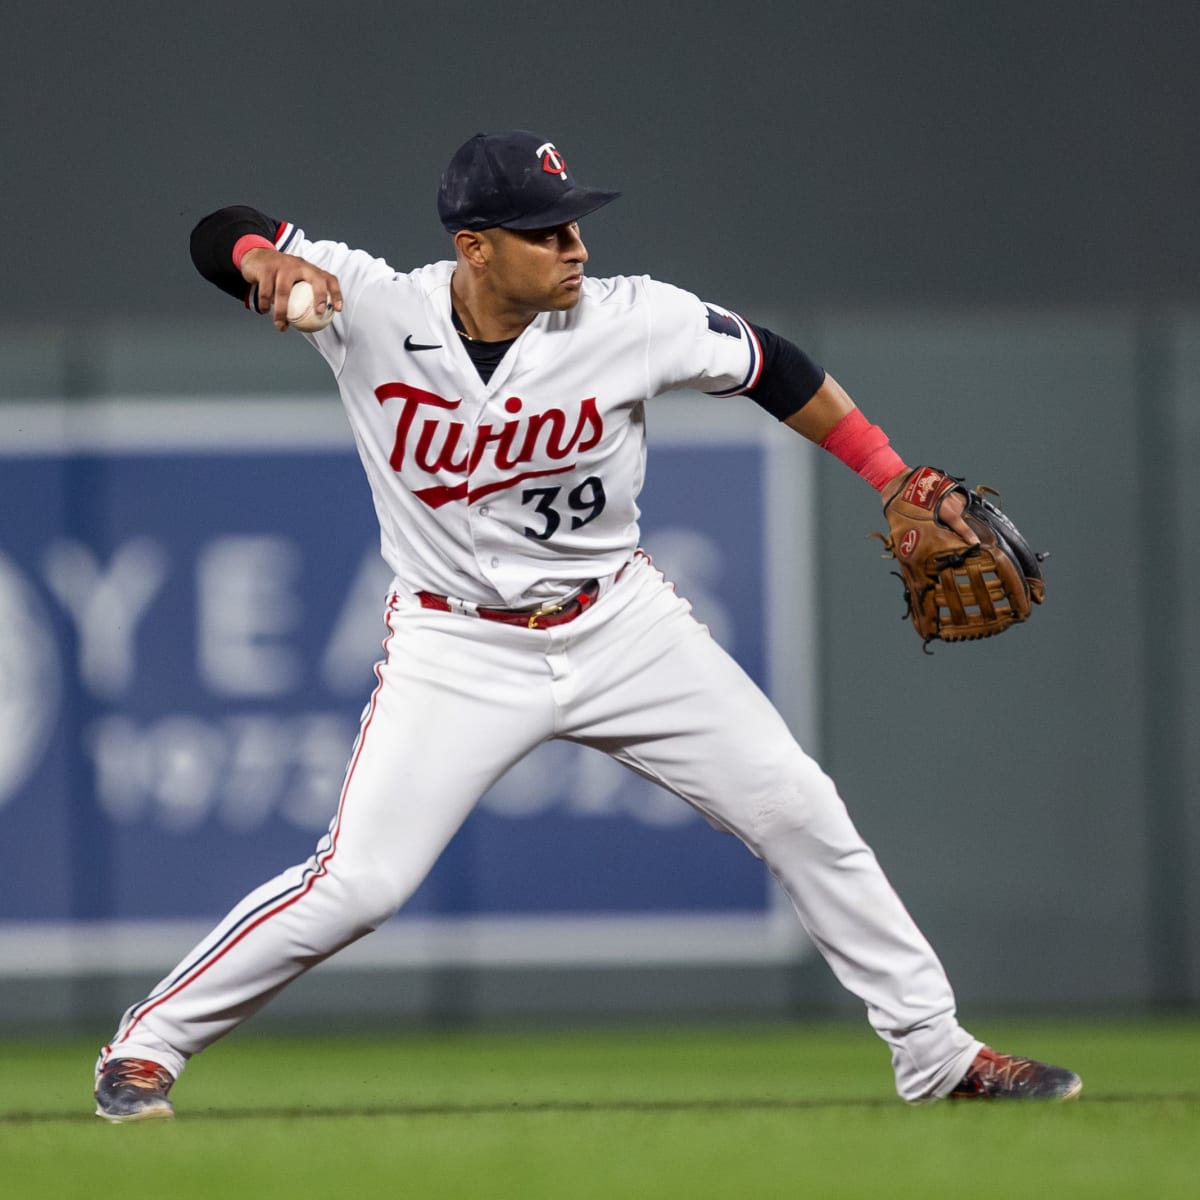 White Sox at Twins Free Live Stream MLB Online, Channel, Time - How to Watch and Stream Major League and College Sports